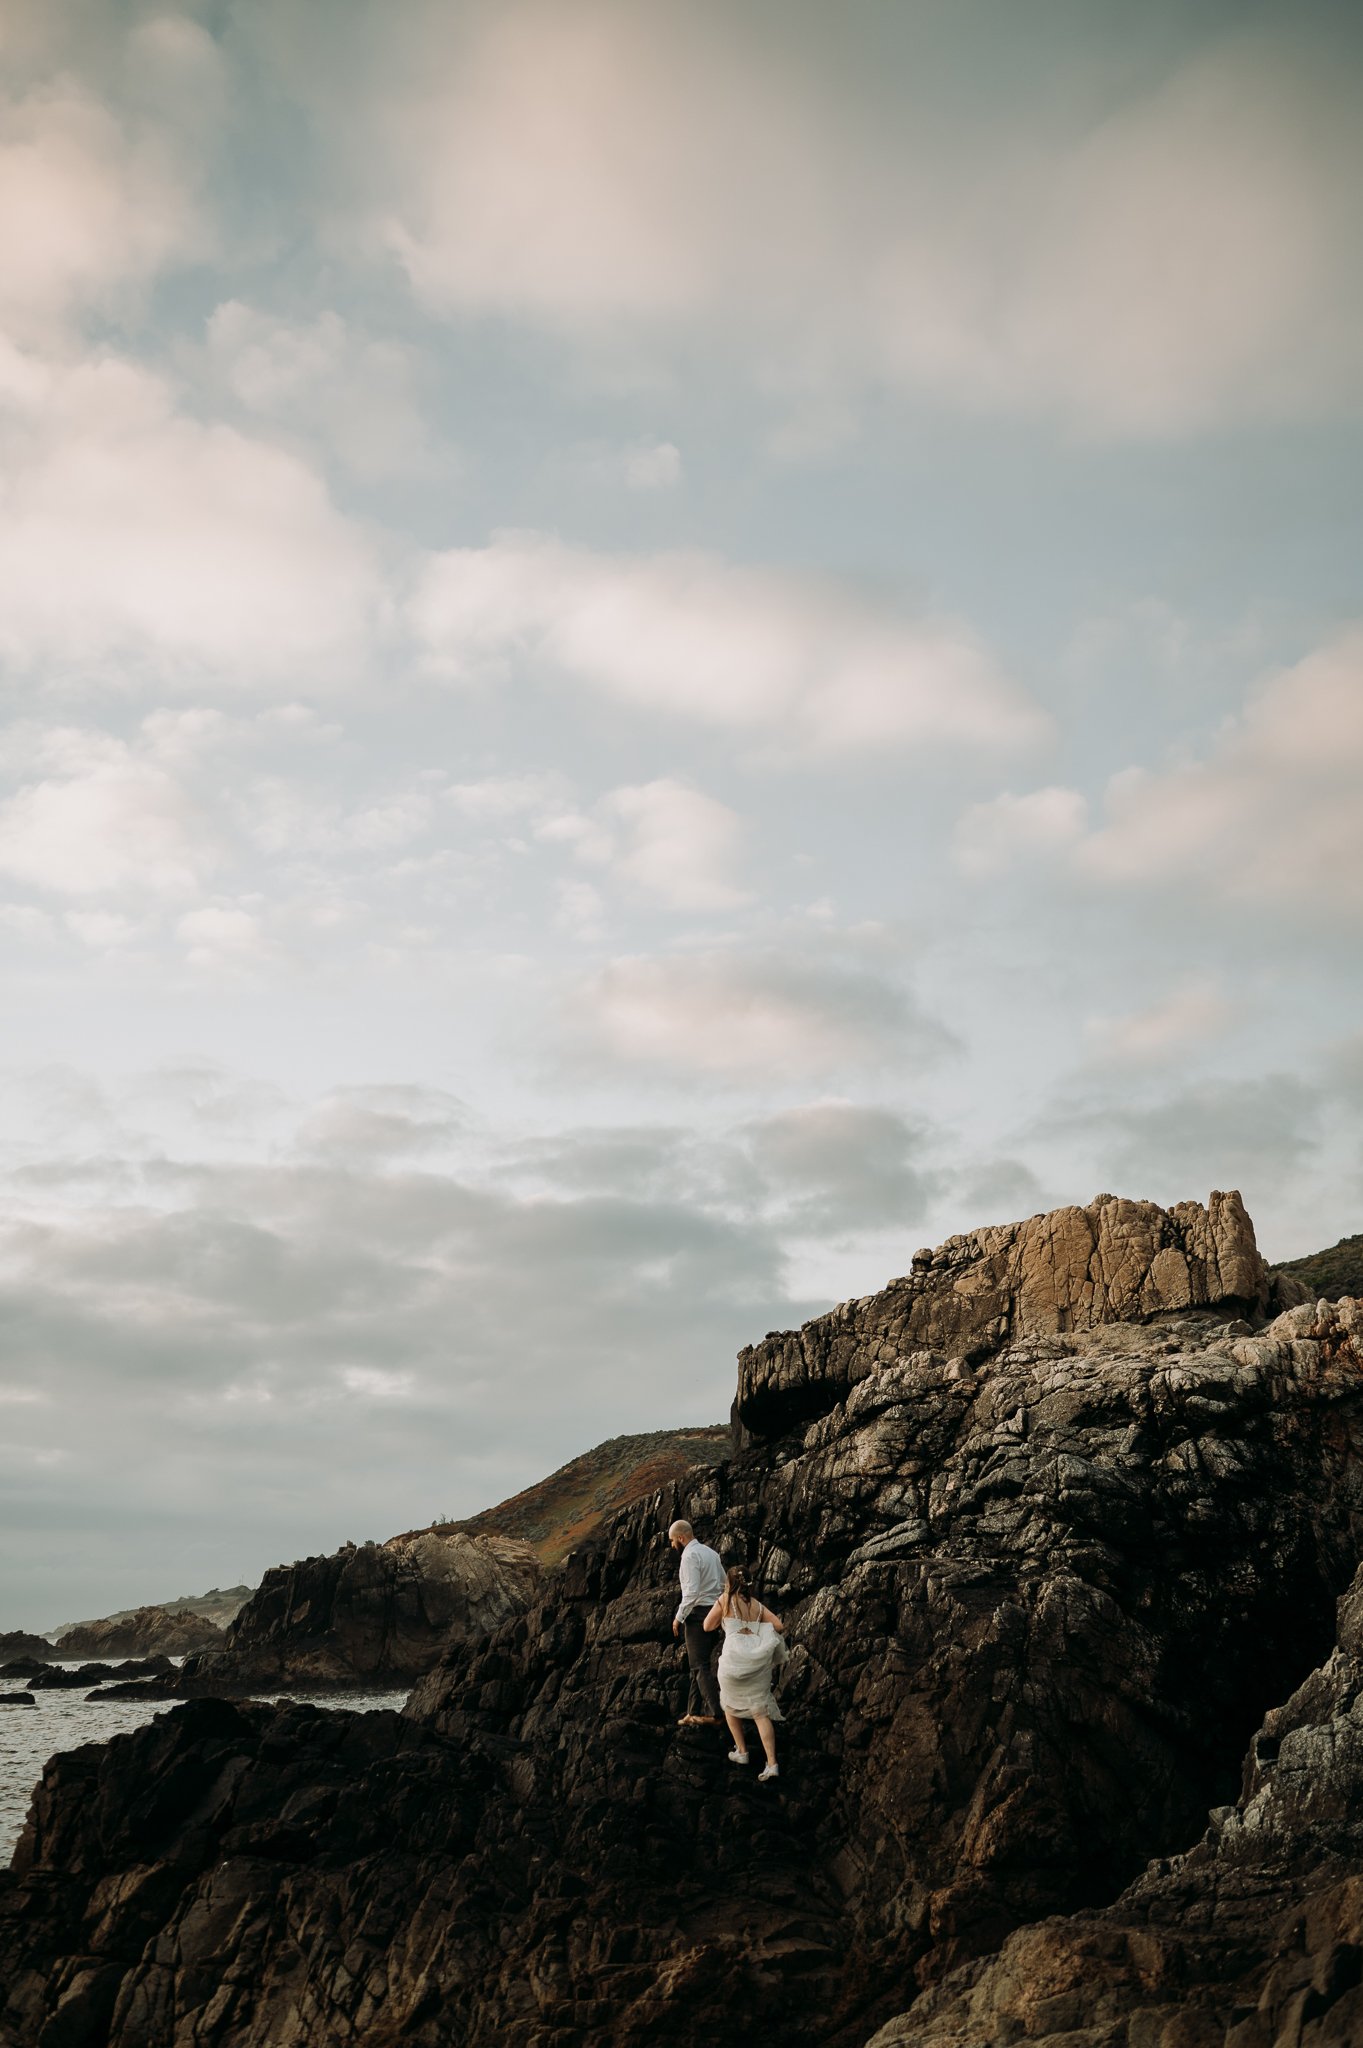 newly married couple in bridal dress and suit climbing cliffs at Big Sur California 